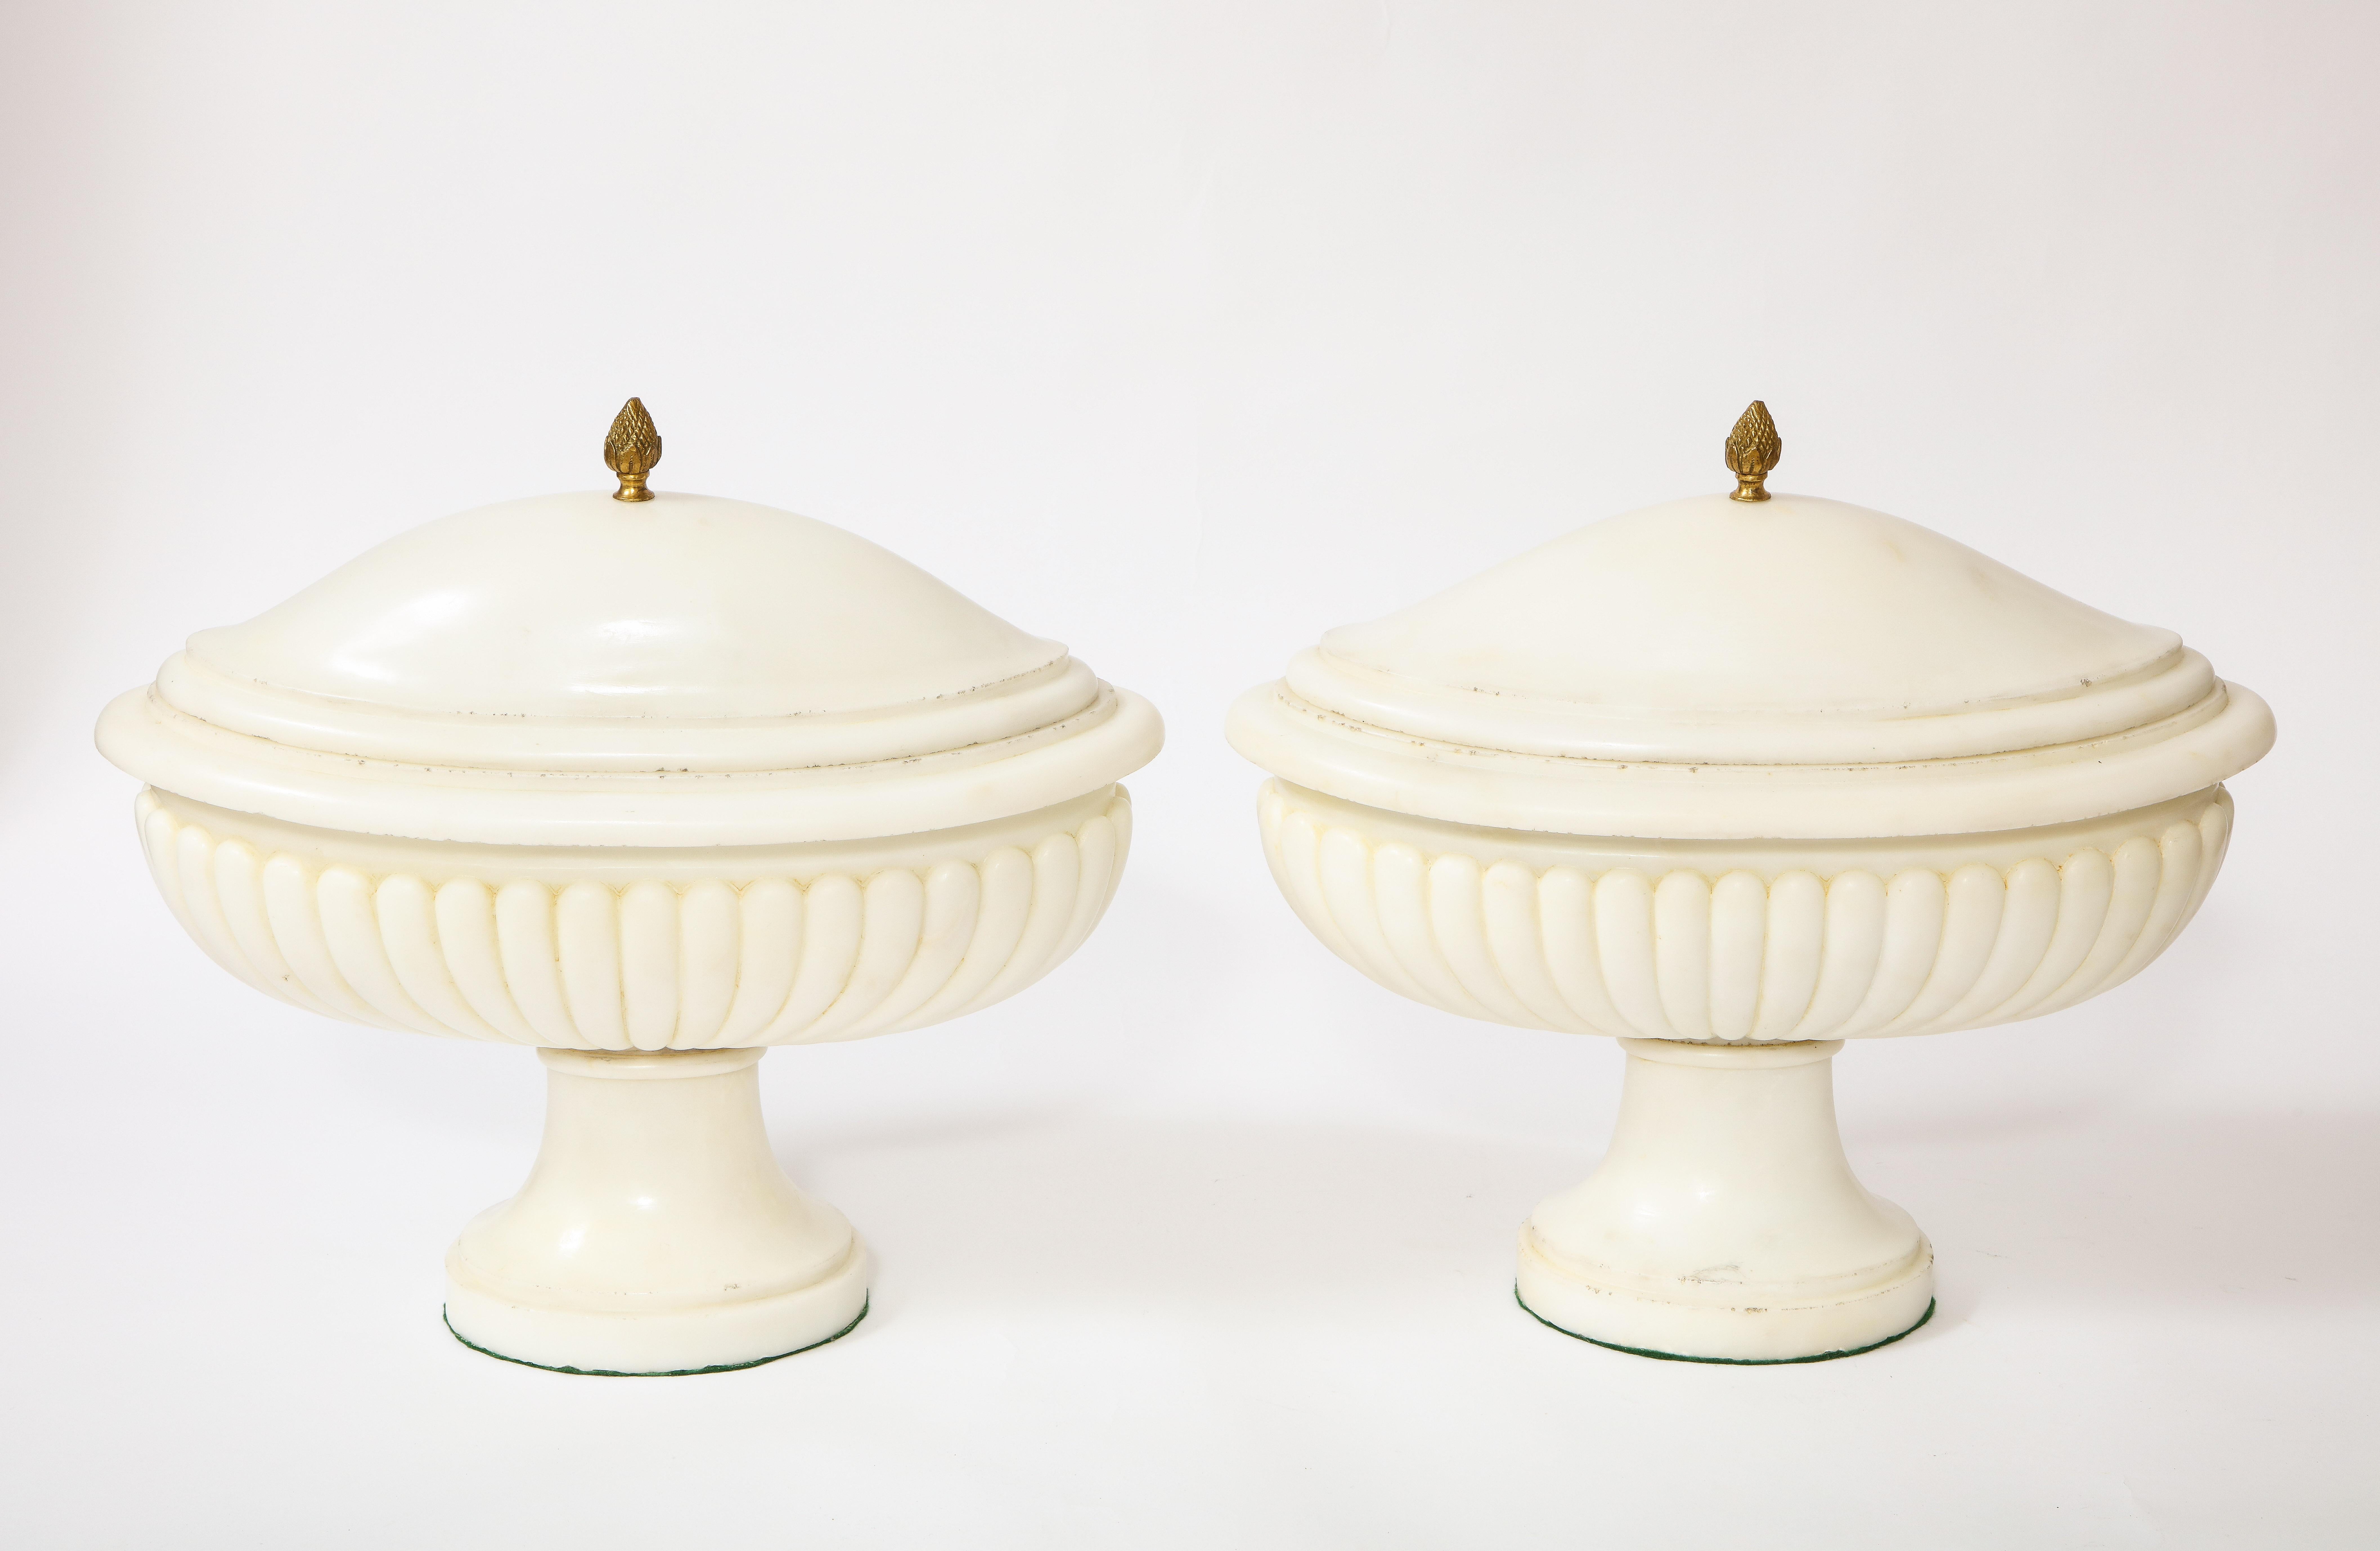 A gorgeous and finely hand-carved pair of grand-tour period neoclassical style Carrara marble covered bowls/centerpieces. Each piece is of oval form with hand-carved scalloped bodies. The tops are also hand-carved with the finest Italian Carrara